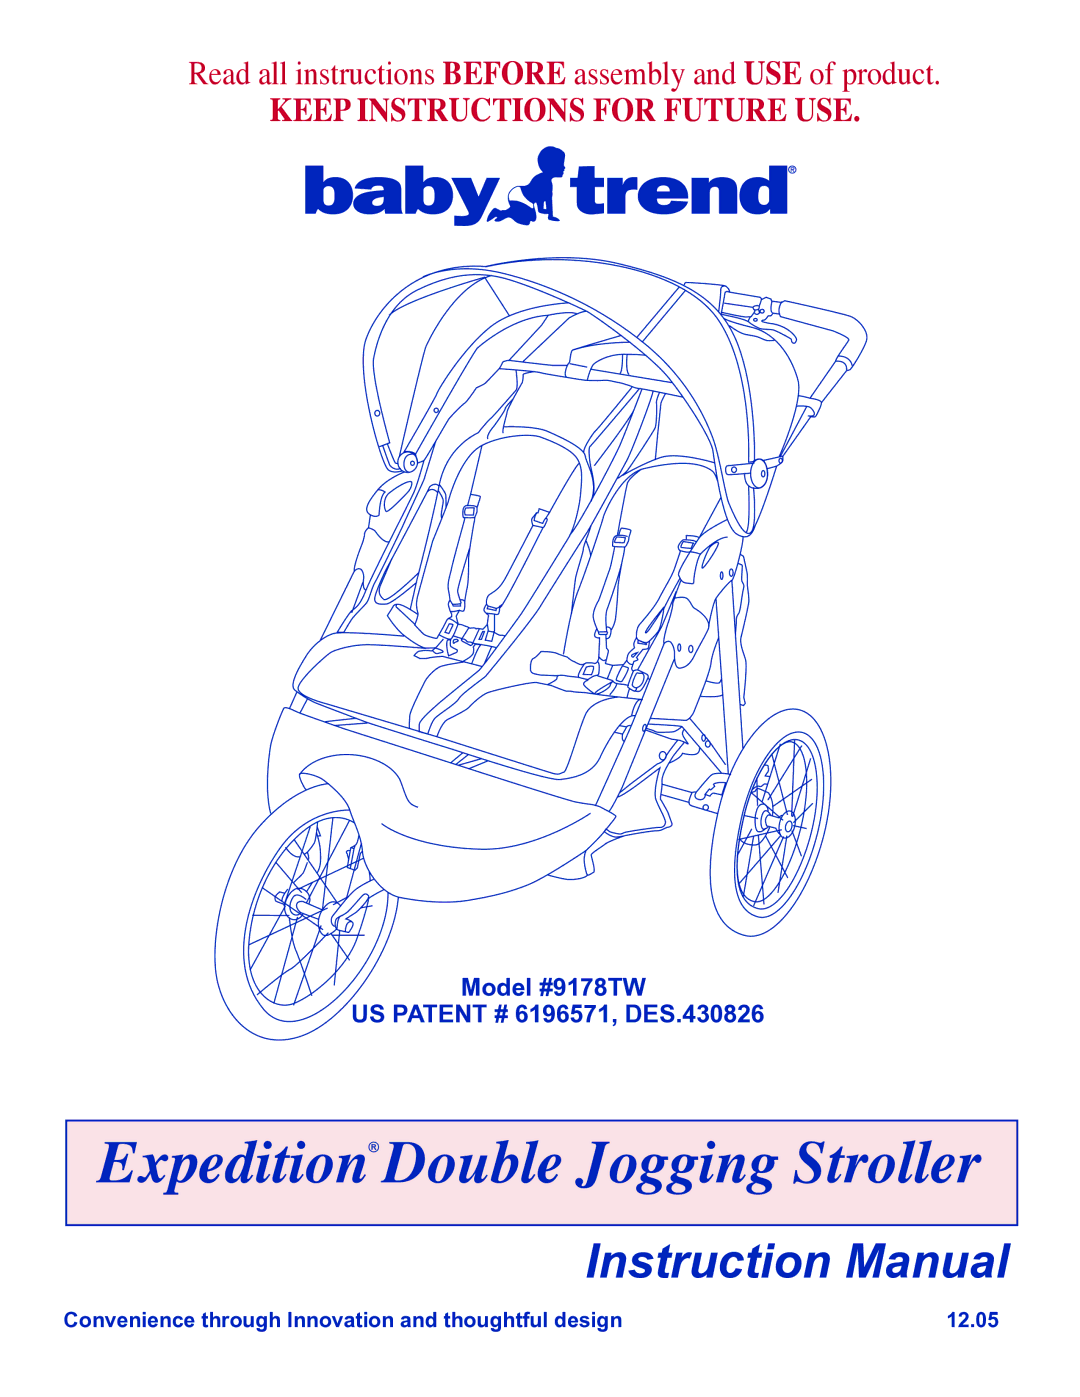 Baby Trend 9178TW manual Expedition Double Jogging Stroller 